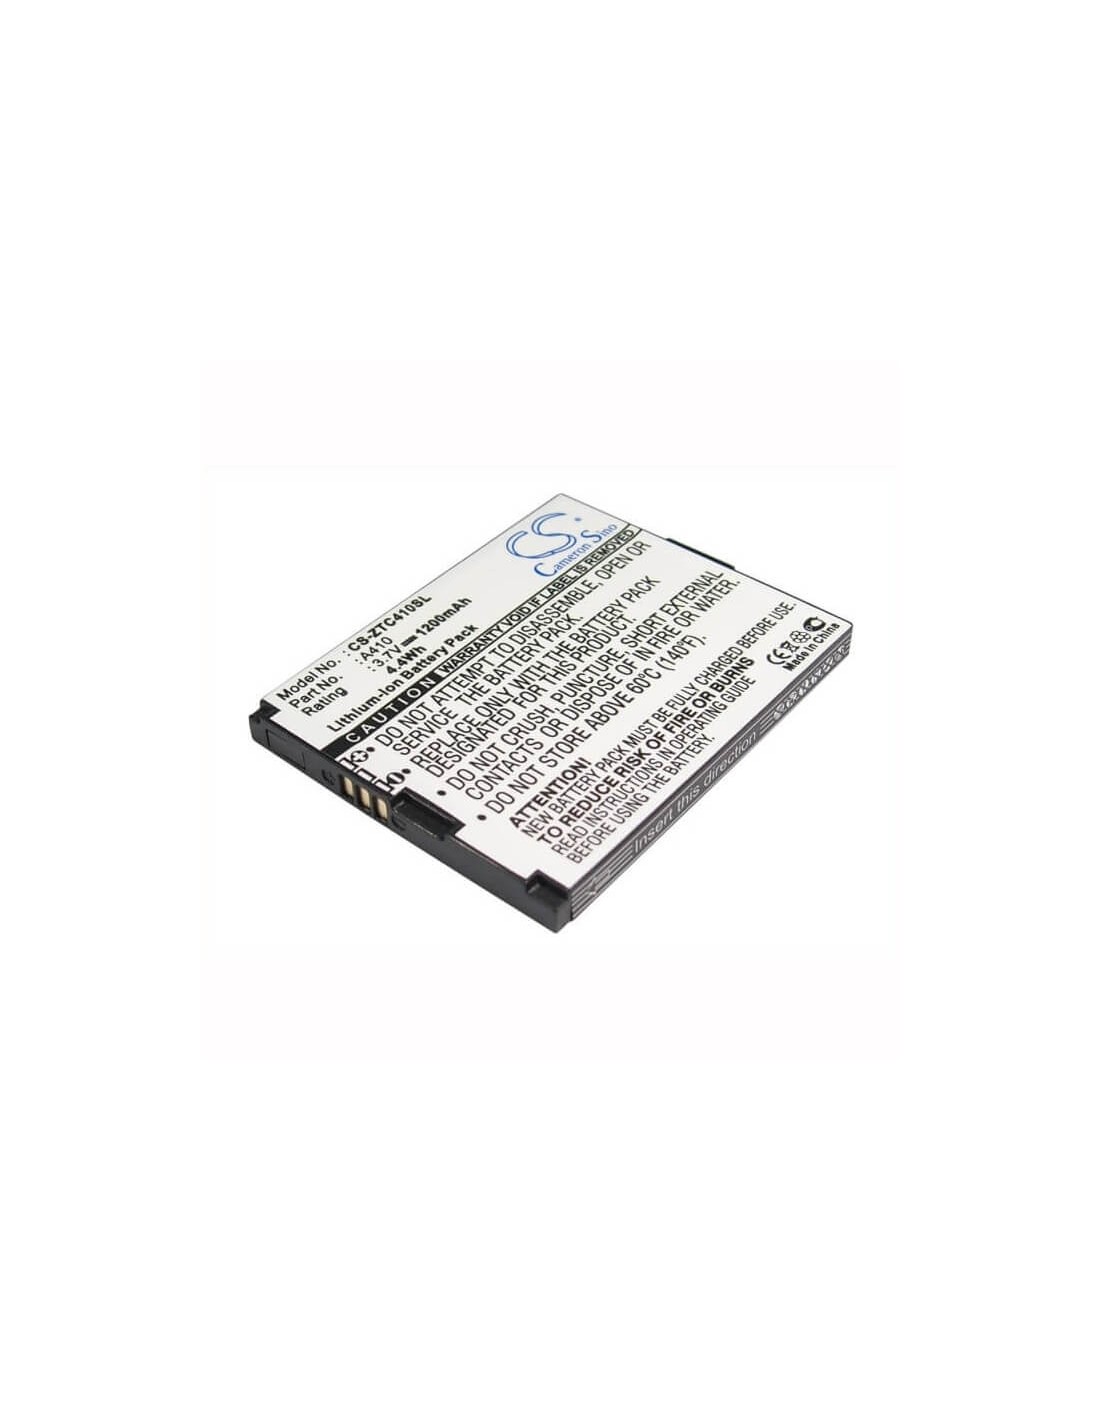 Battery for ZTE Cricket A410, Calcomp A410, PCD Calcomp A410 3.7V, 1200mAh - 4.44Wh